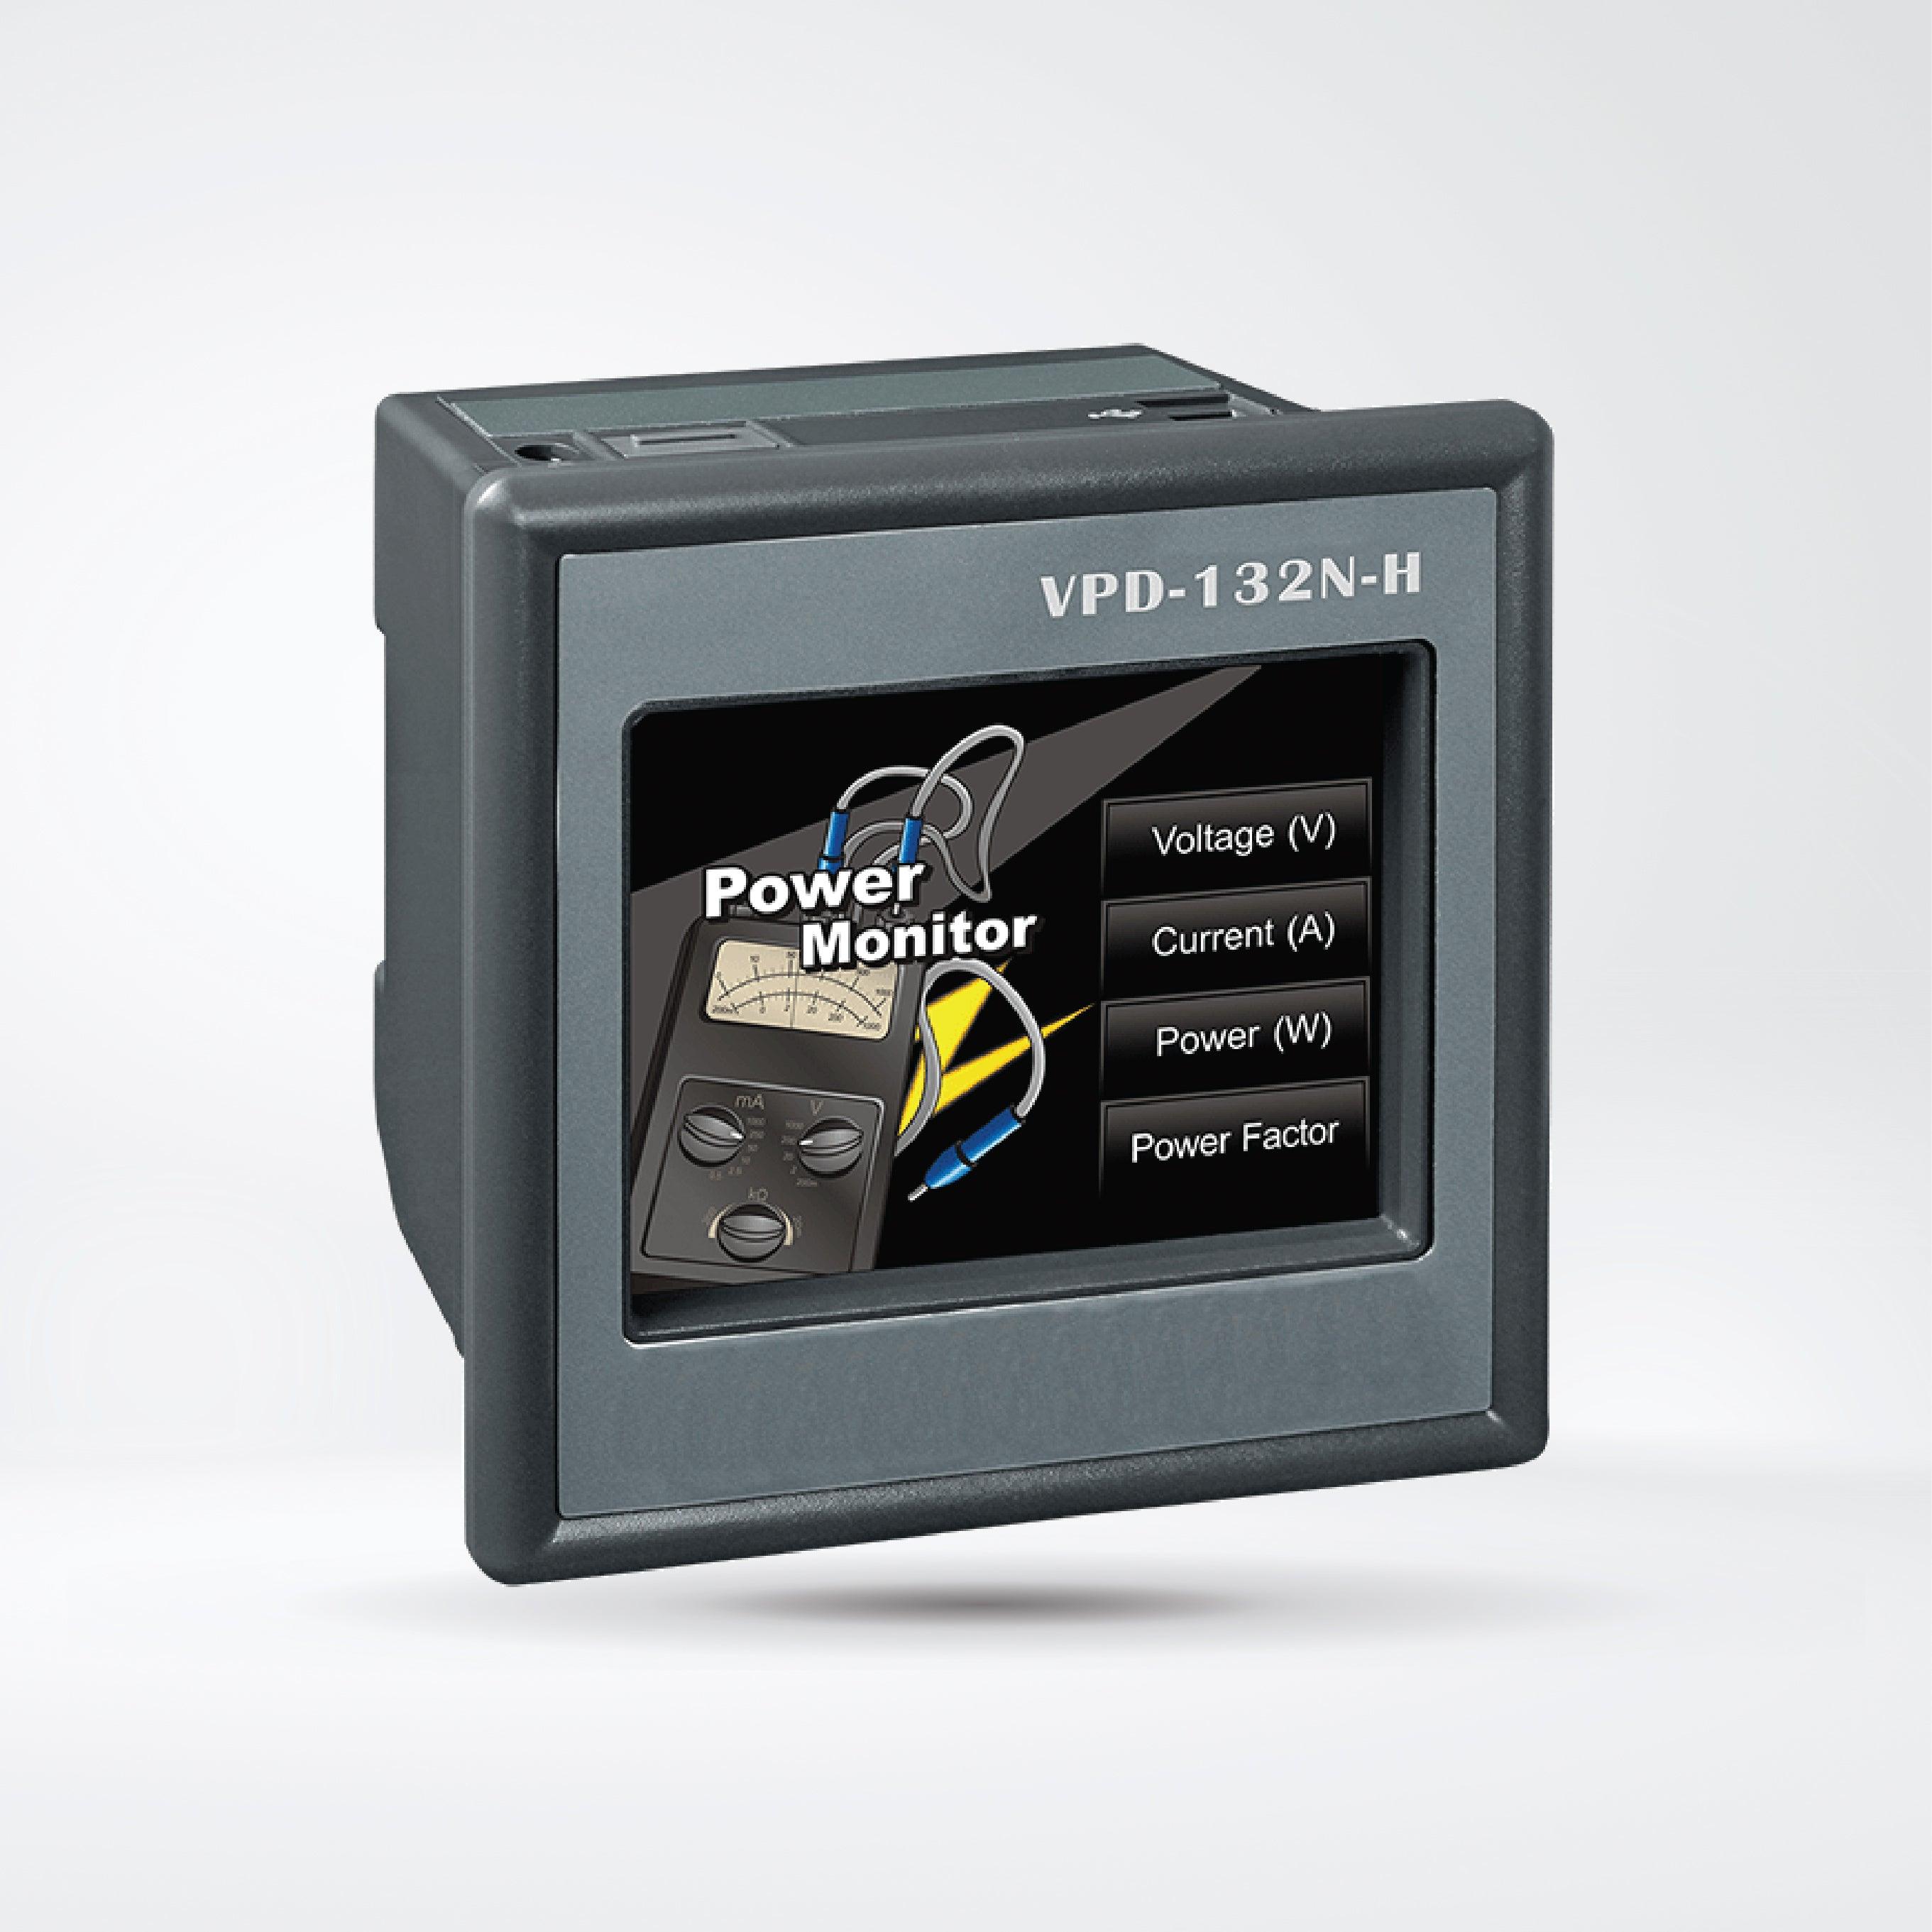 VPD-132N-H 3.5" Touch HMI Device with 2 x RS-232/RS-485 - Riverplus